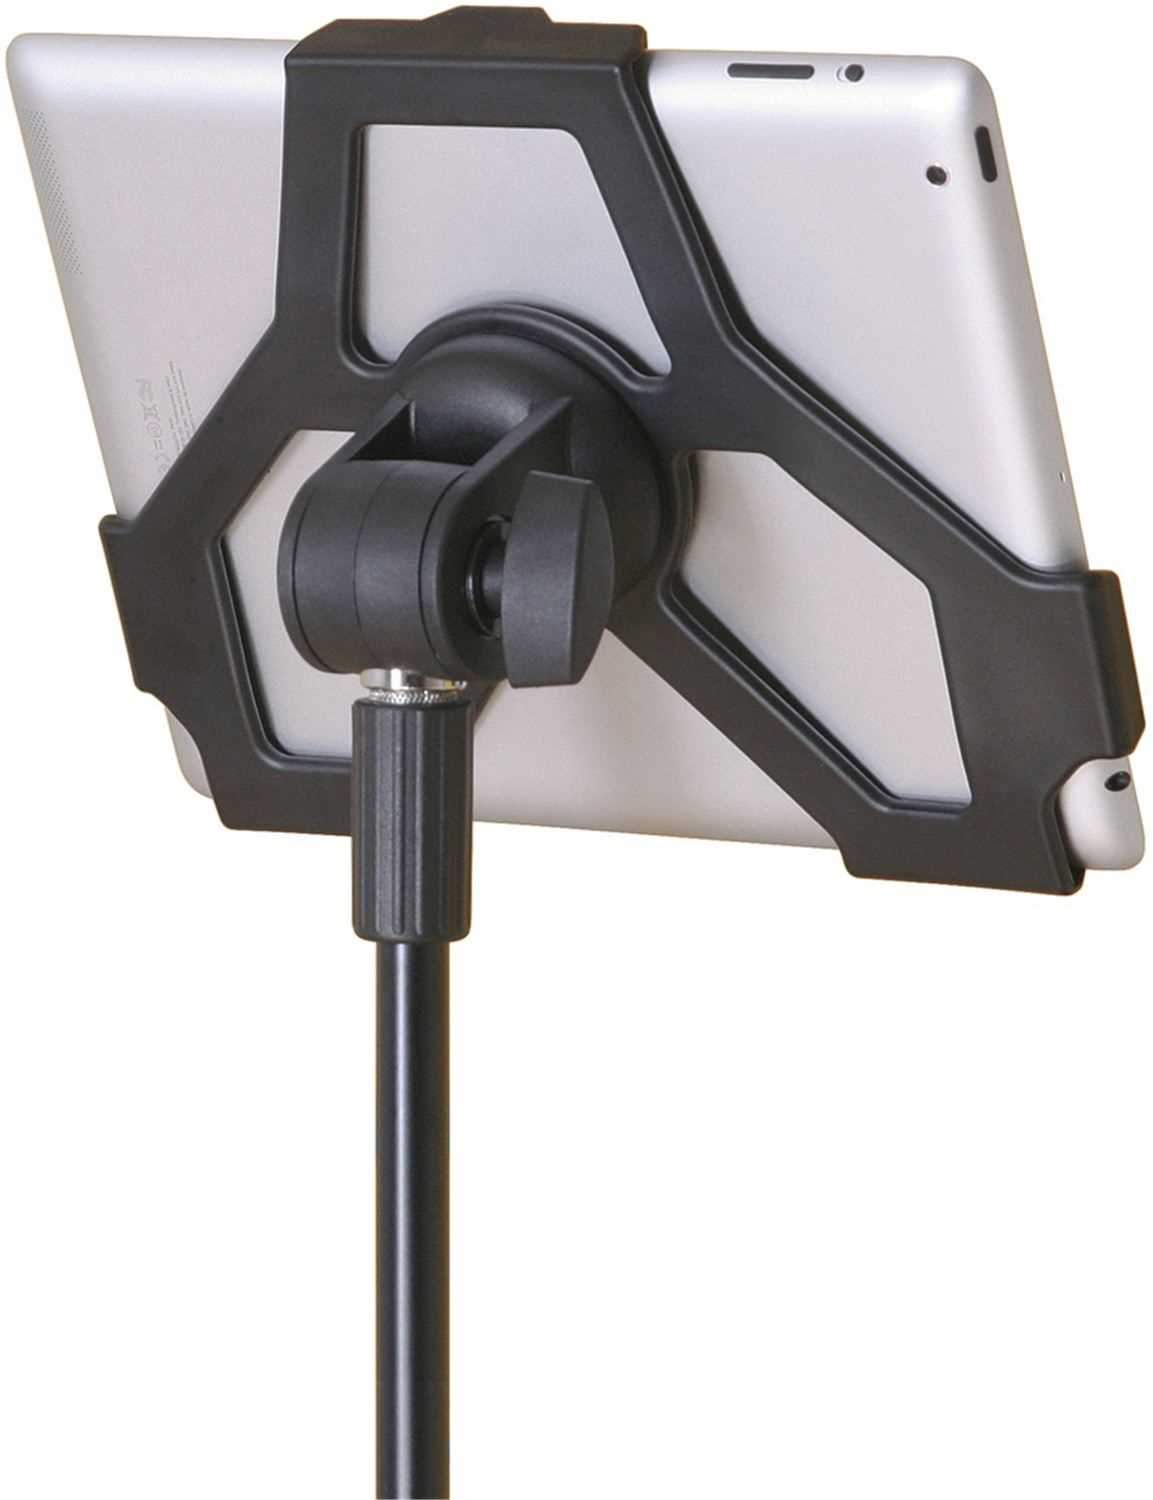 K&M 19712 iPad-2 Microphone Stand Holder Adapter - ProSound and Stage Lighting